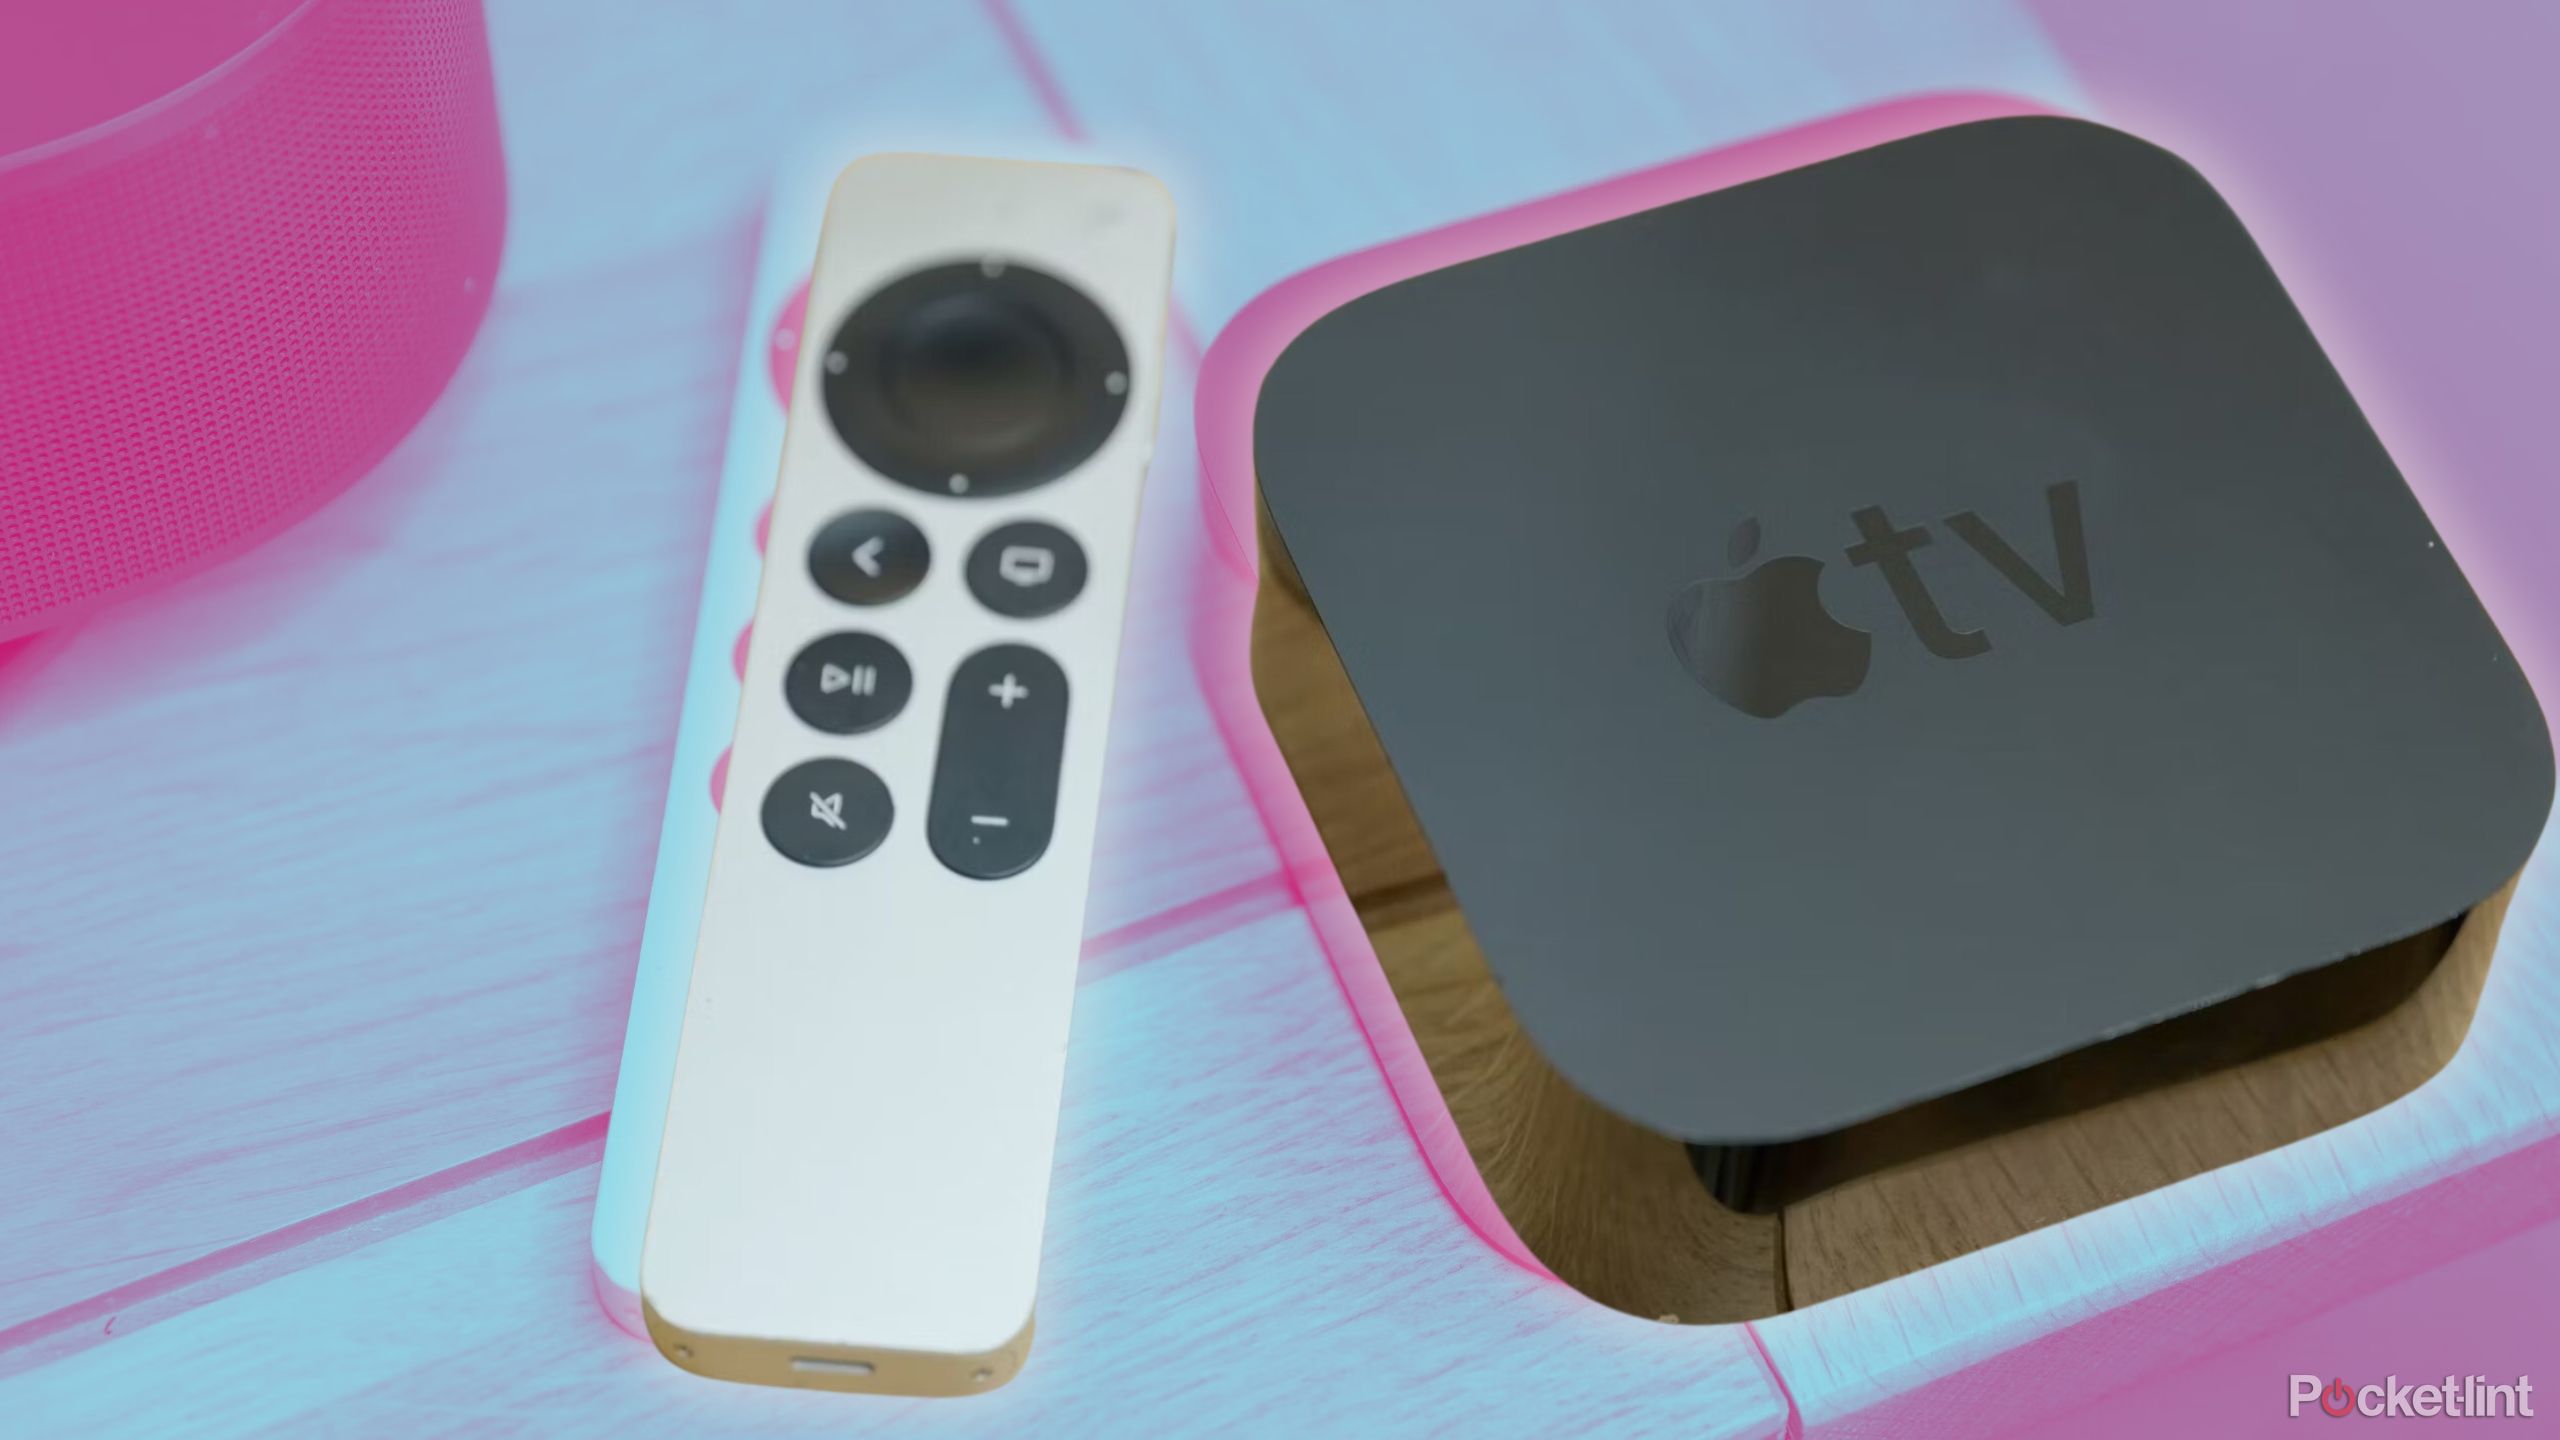 5 tvOS features to use on Apple TV